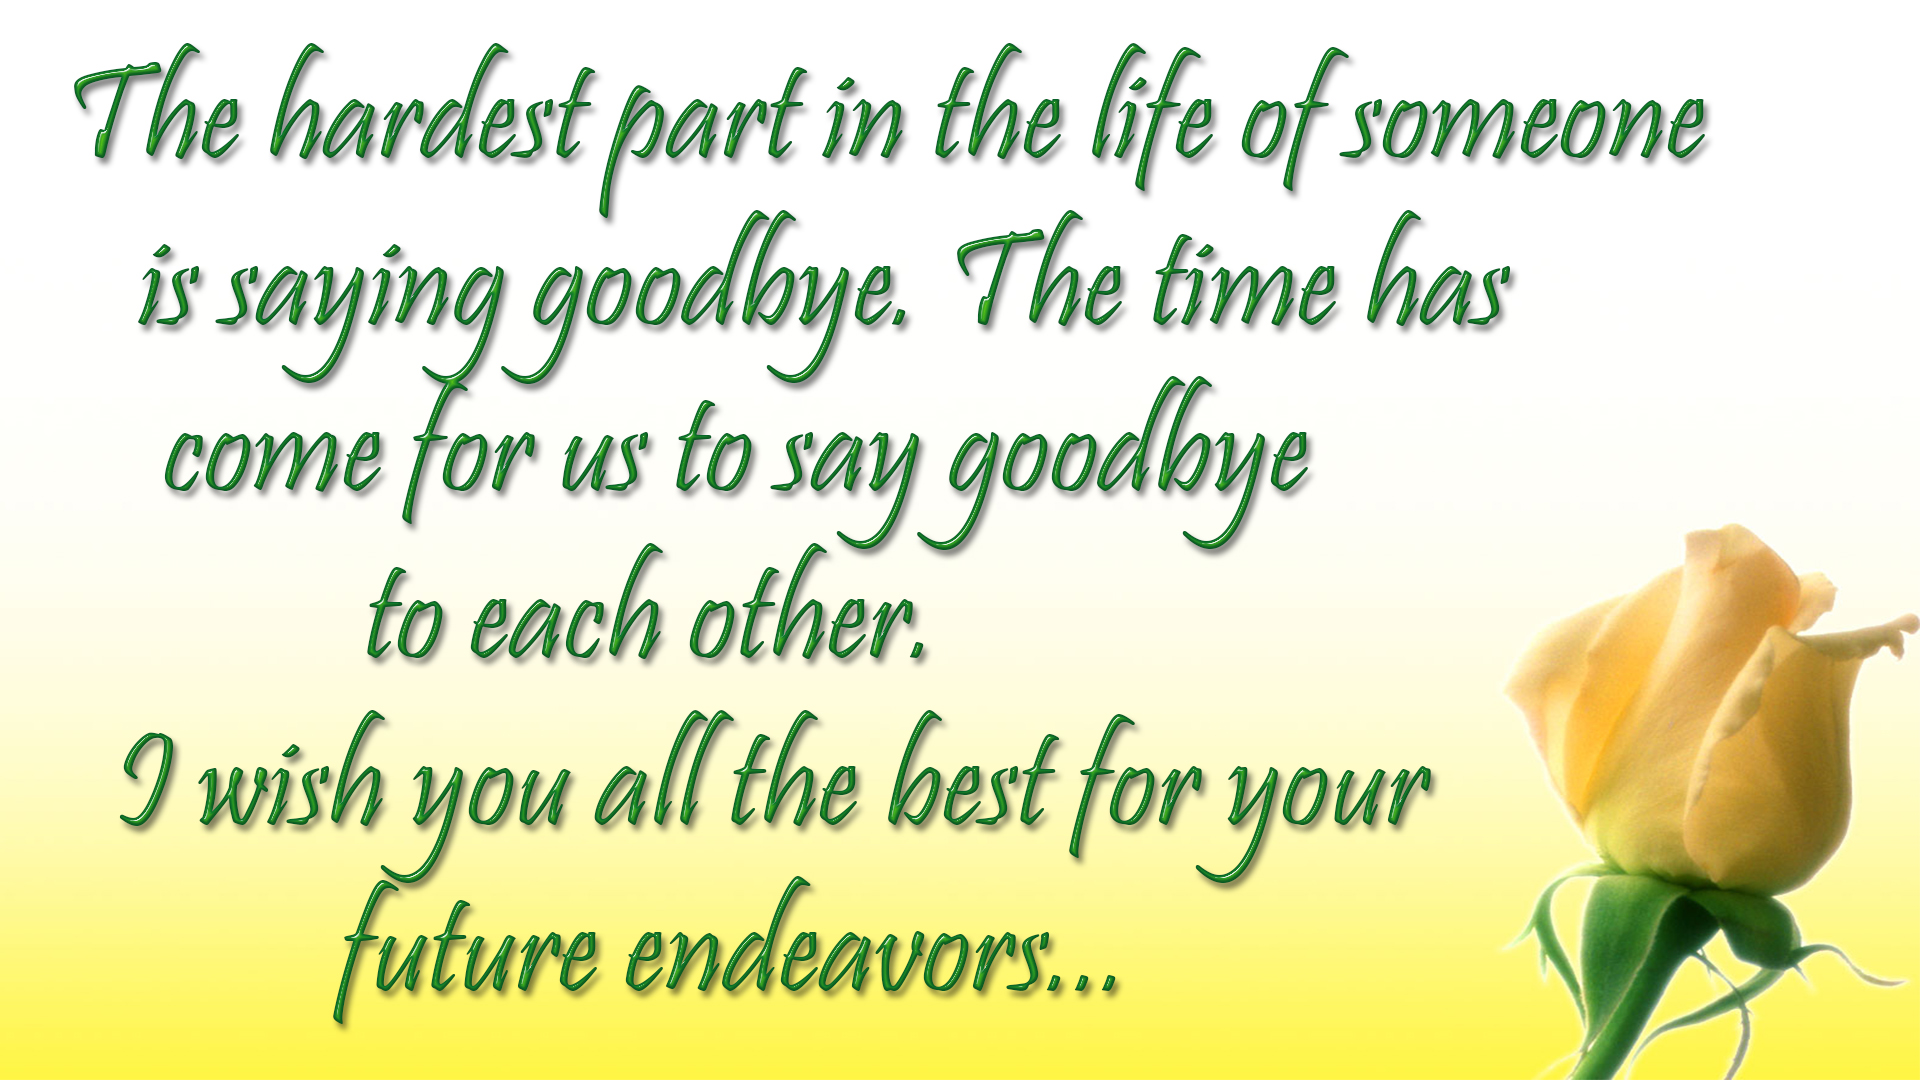 farewell messages image